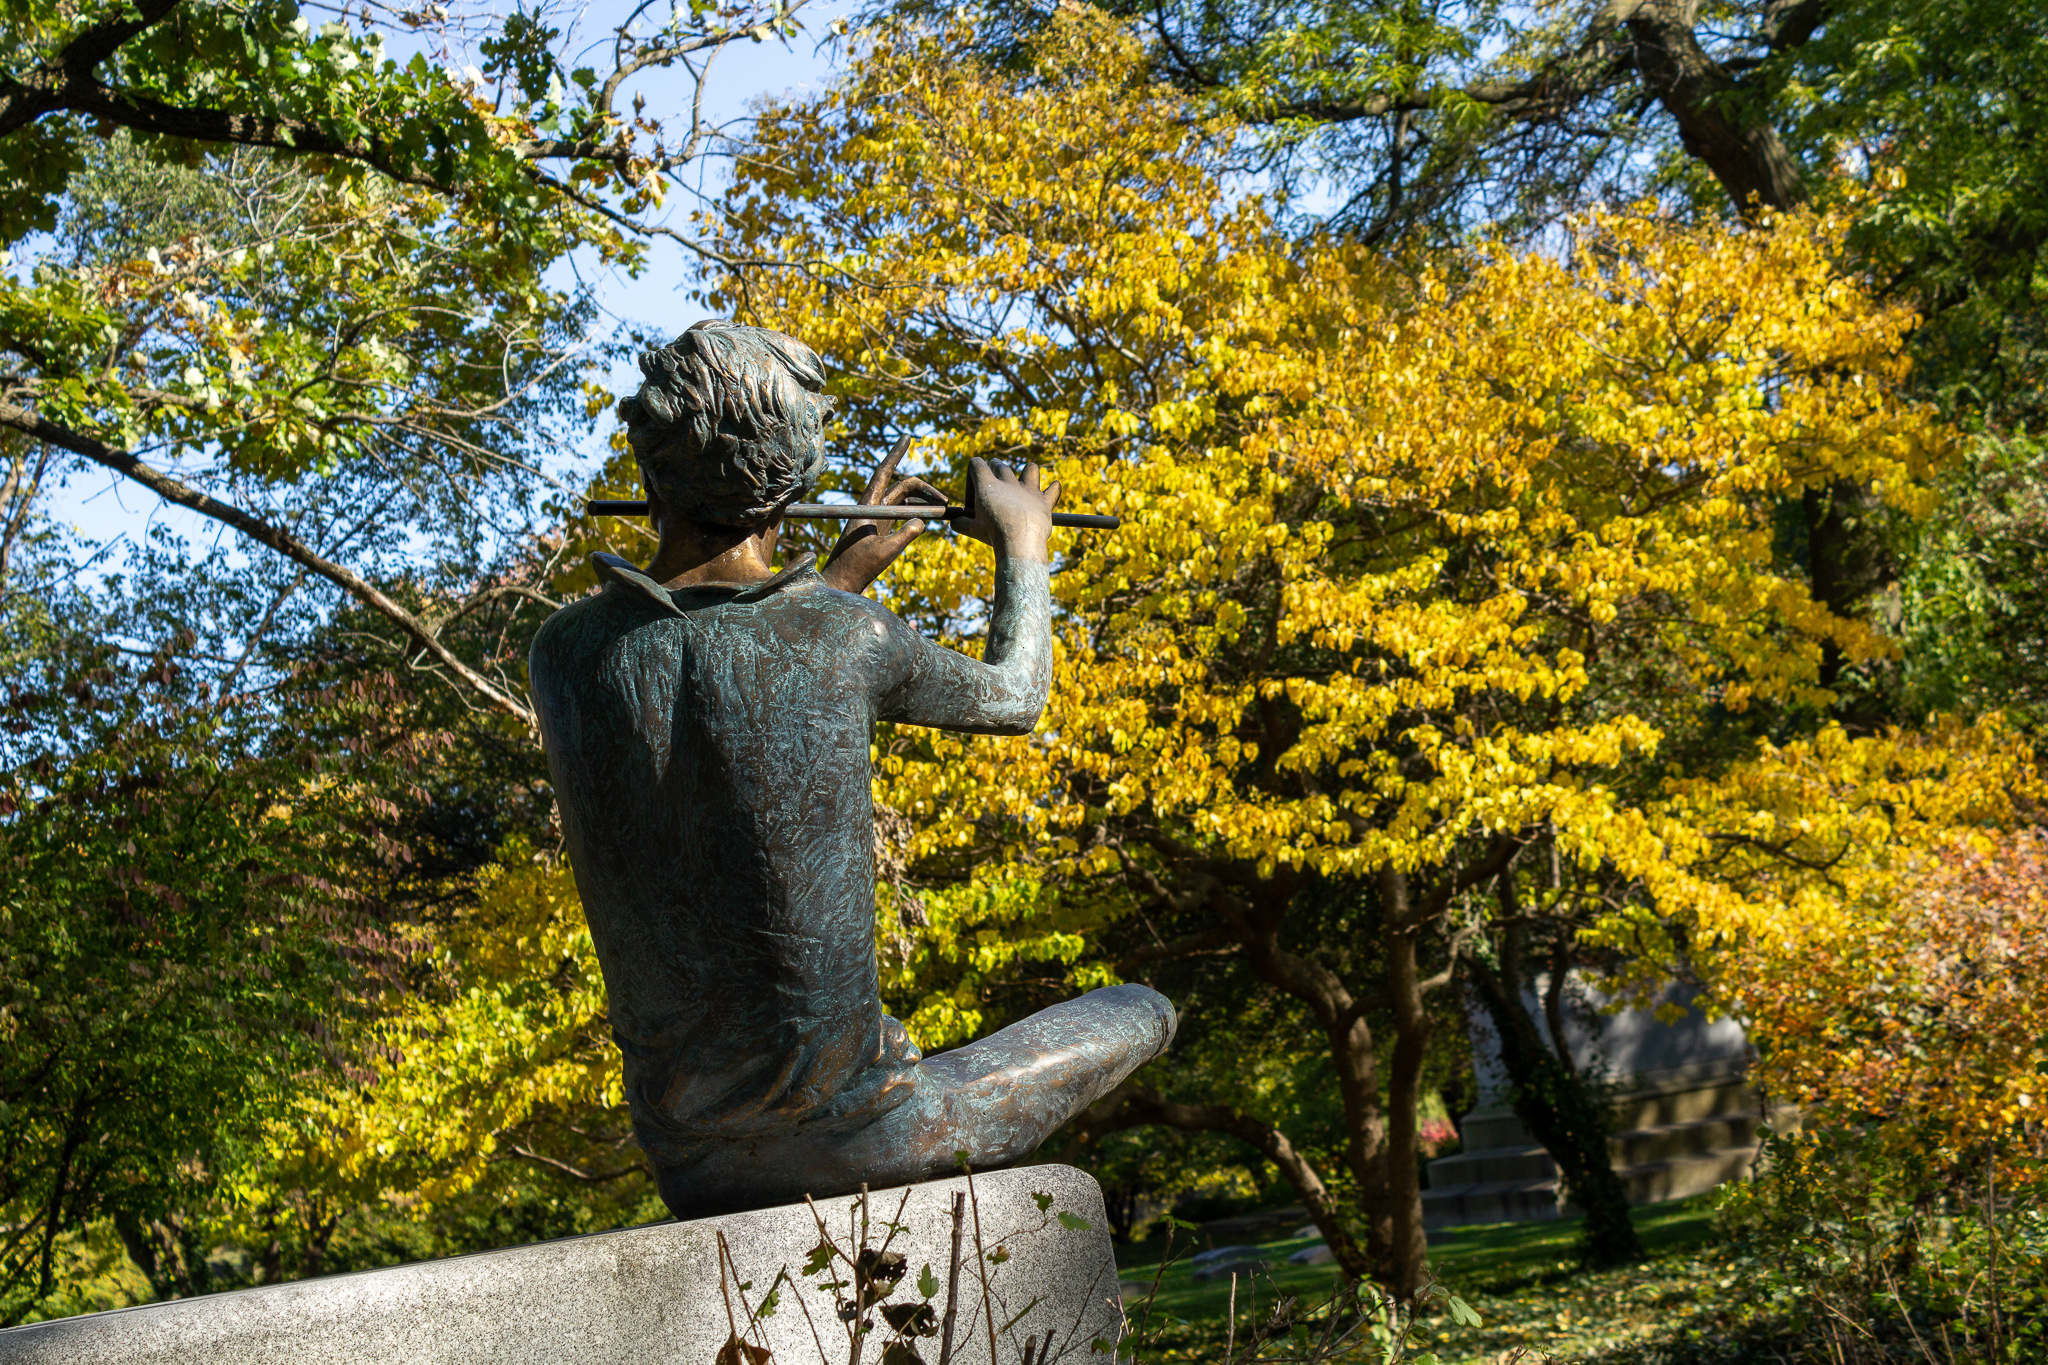 The aged bronze figure of a boy playing a flute, seated on a gravestone, yellow trees in the background